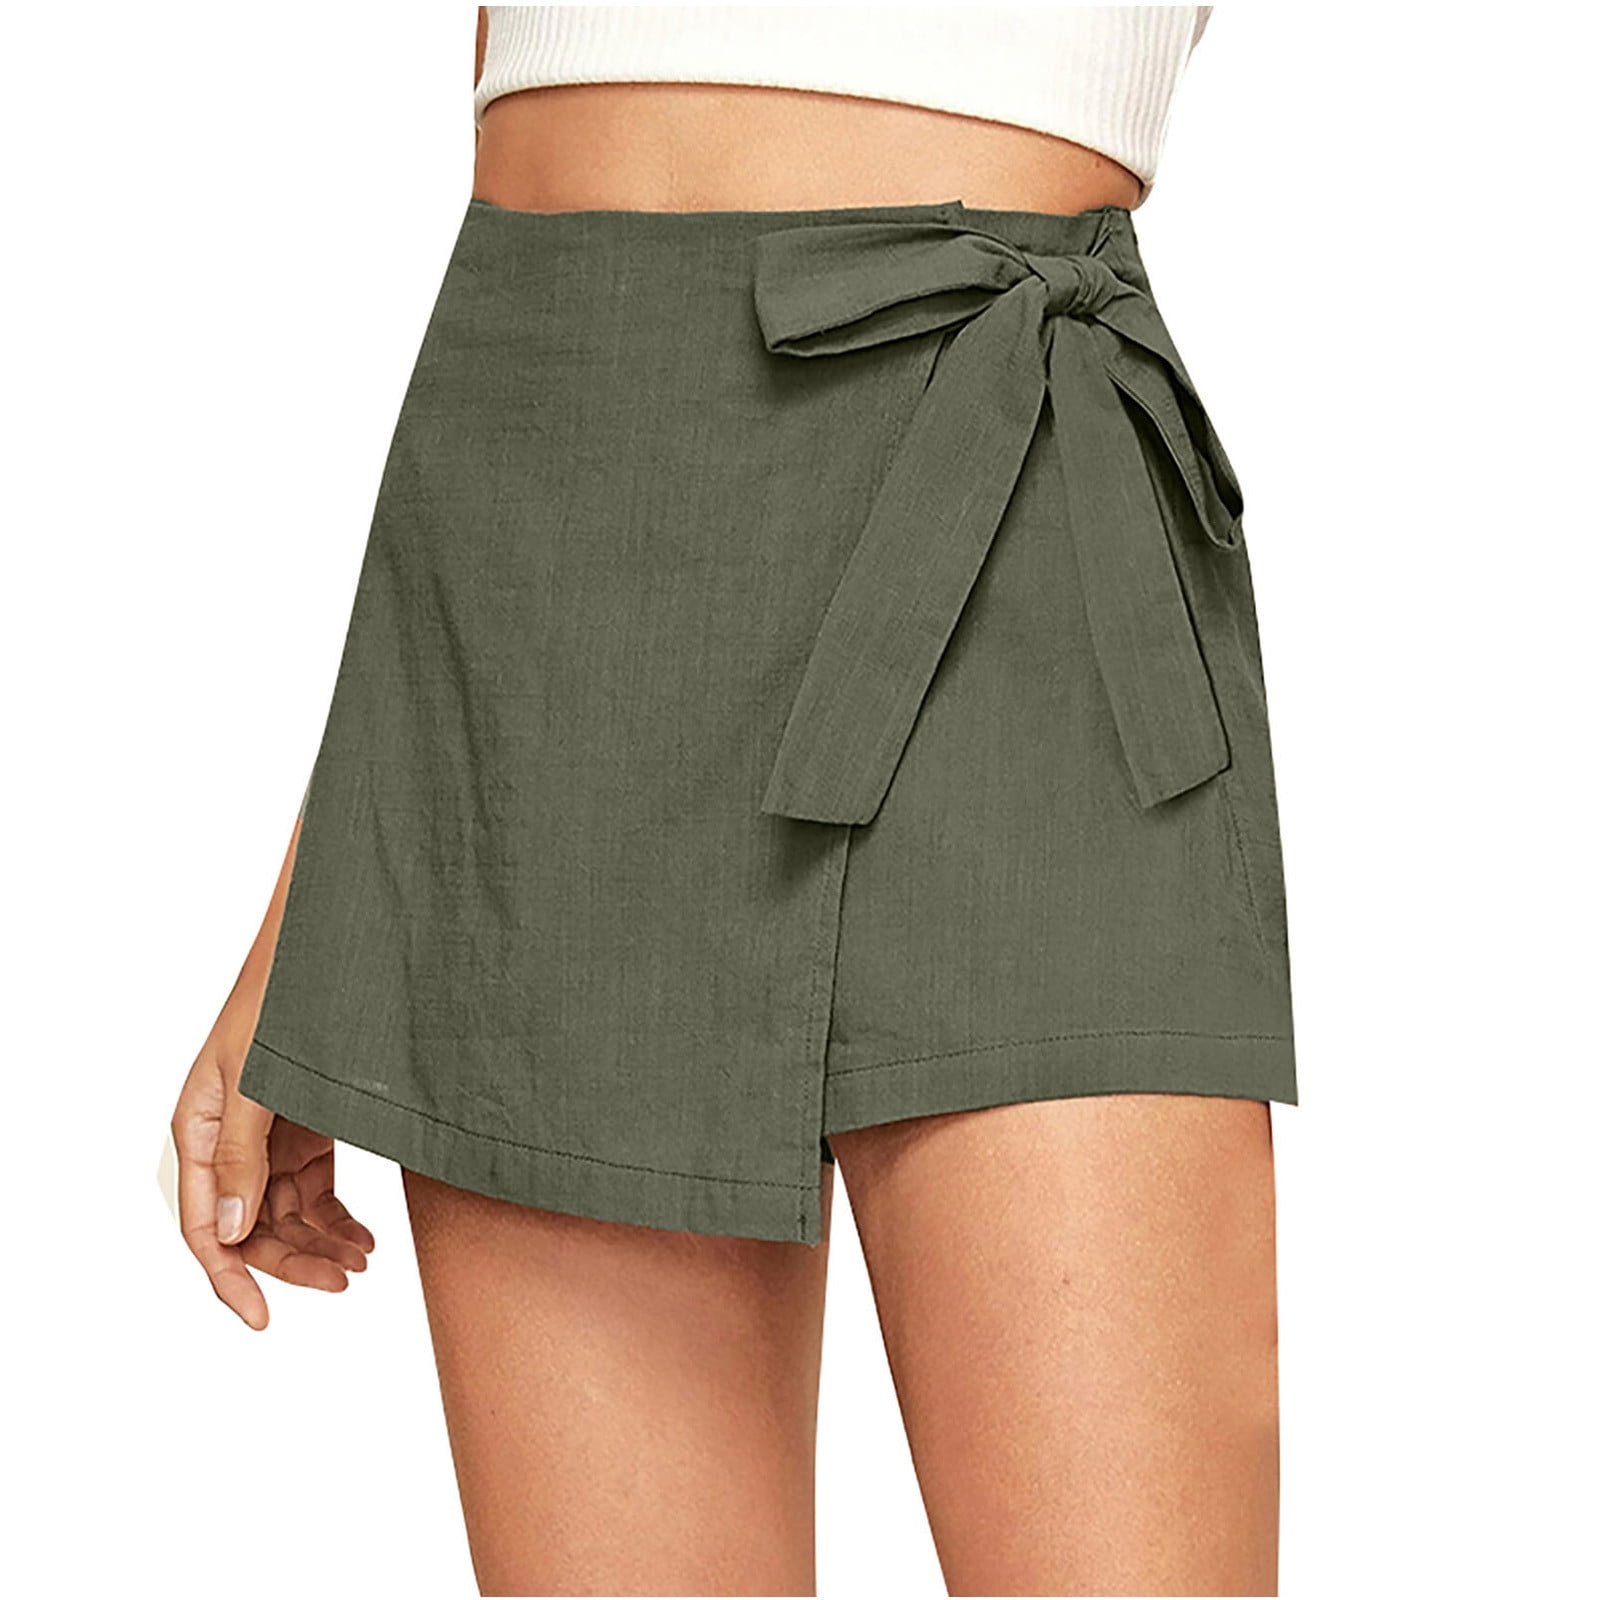 Women's High Waisted Summer Shorts Skirt Solid Color Casual Comfy Beach  Linen Cotton Side Knotted Mini Skort Skirt